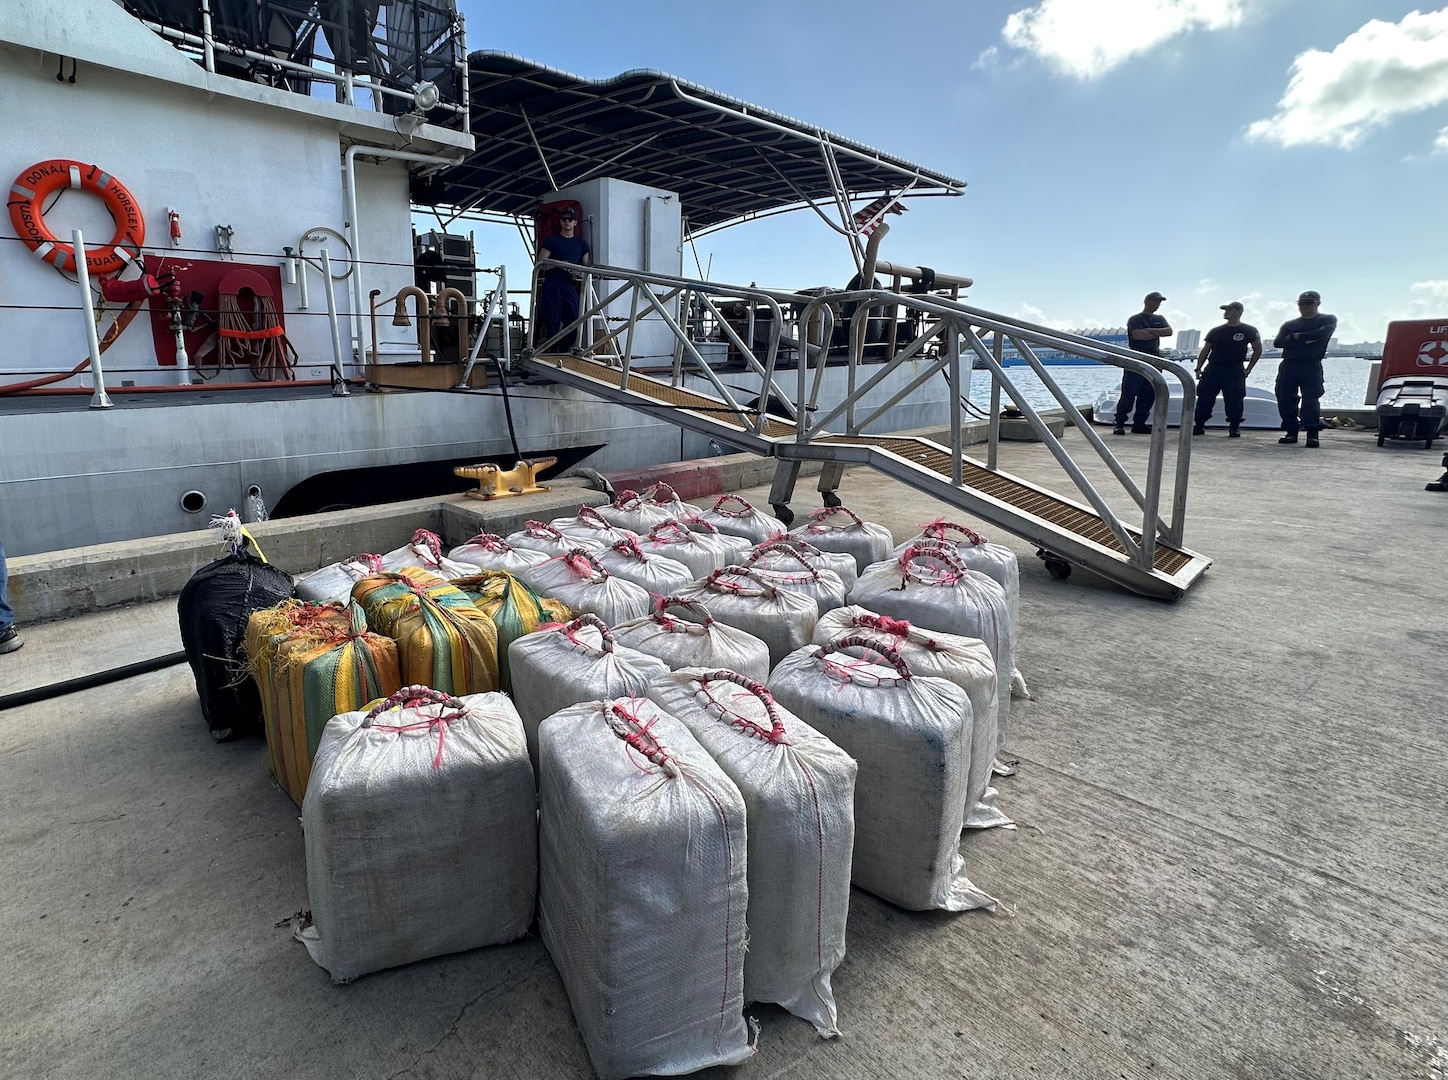 Coast Guard Cutter Donald Horsley crew members offload and transfer $19 million in seized cocaine to federal law enforcement agents in San Juan, Puerto Rico, Aug. 31, 2023.  The seizure resulted from the interdiction of a go-fast vessel in Caribbean Sea waters southeast of Yabocoa, Puerto Rico Aug. 26, 2023.  Three smugglers apprehended in this are facing federal prosecution in Puerto Rico. (U.S. Coast Guard photo by Ricardo Castrodad)